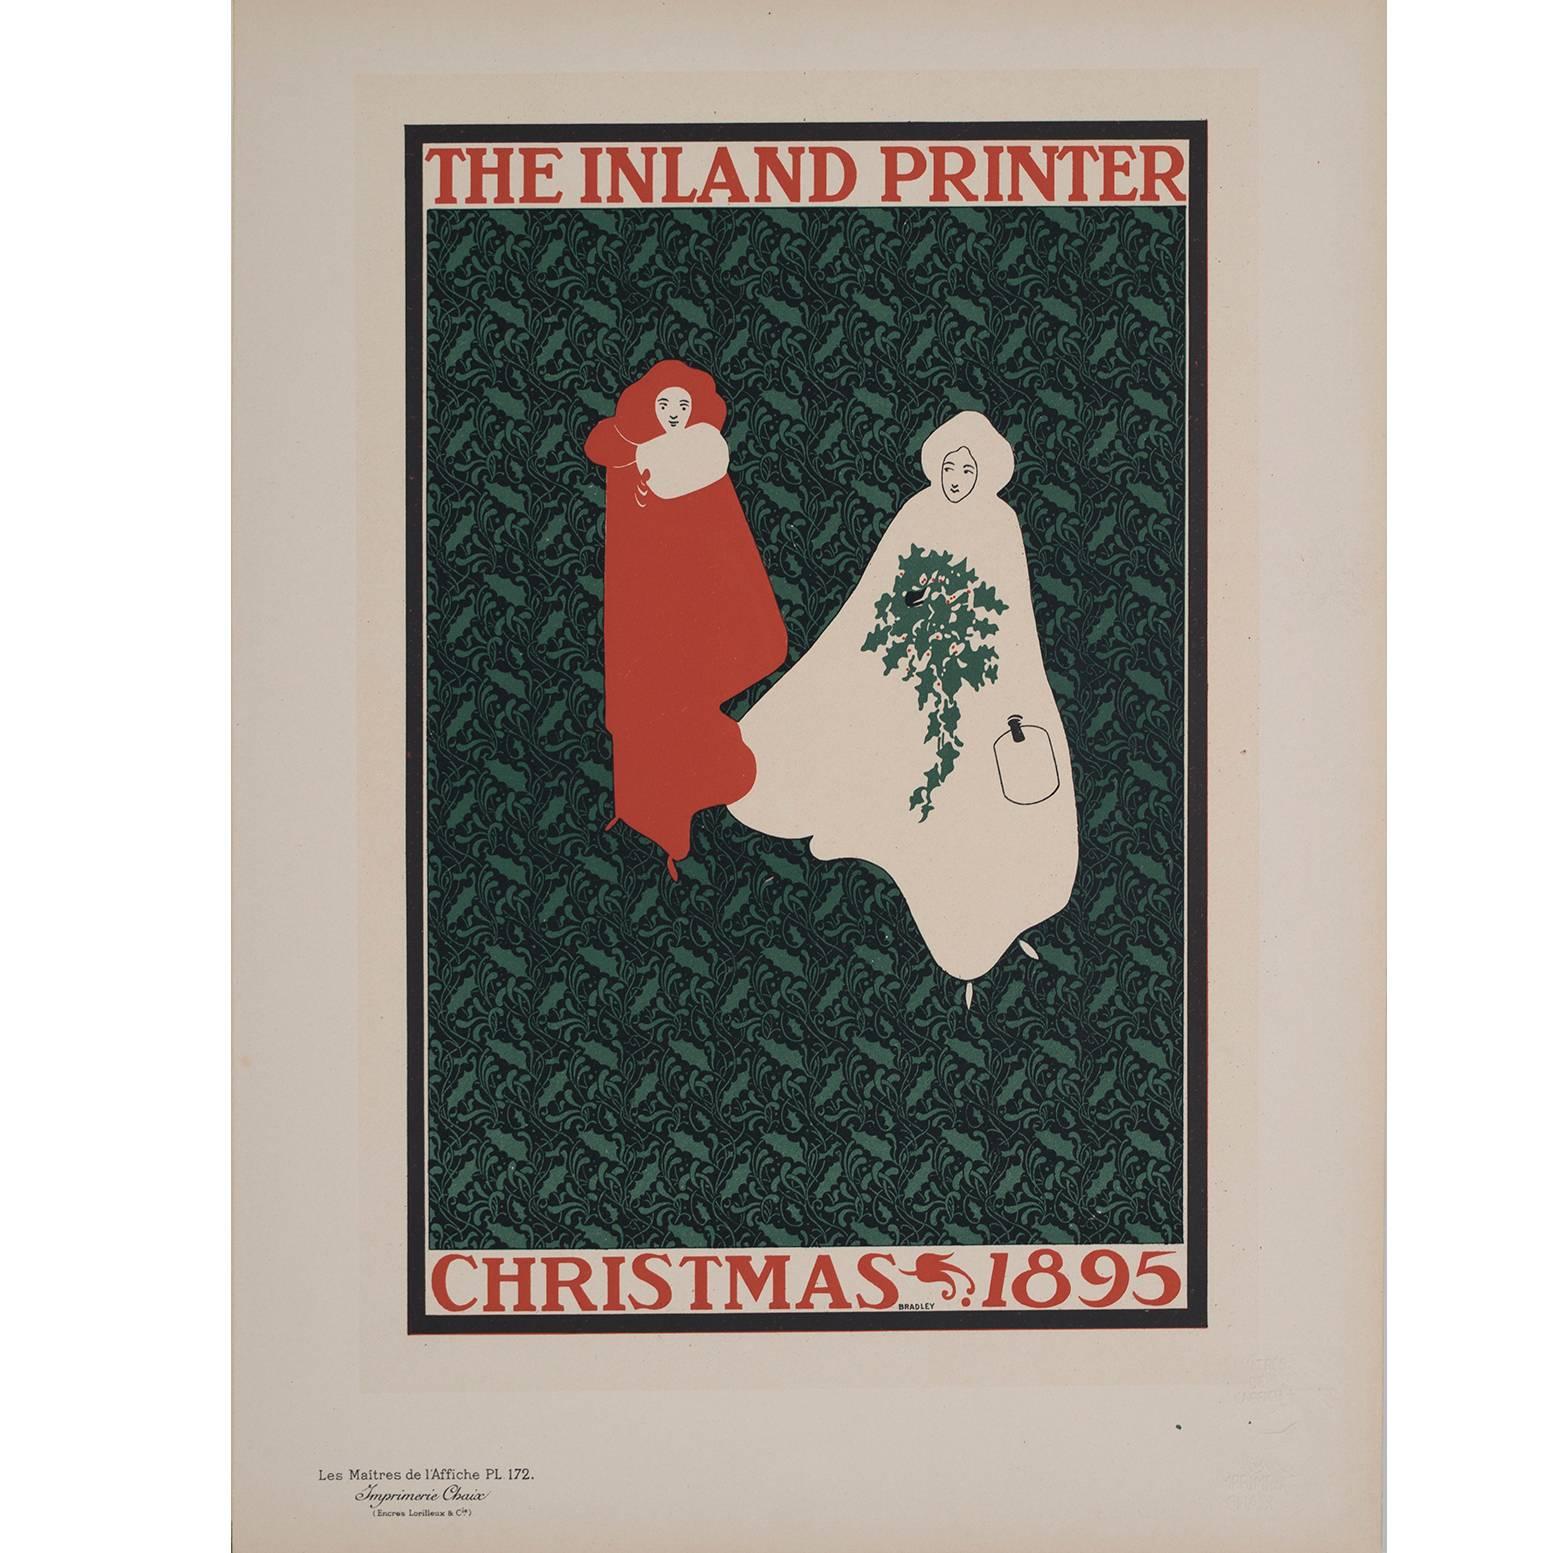 "The Inland Printer, Christmas 1895 " by Will Bradley, 1899 For Sale